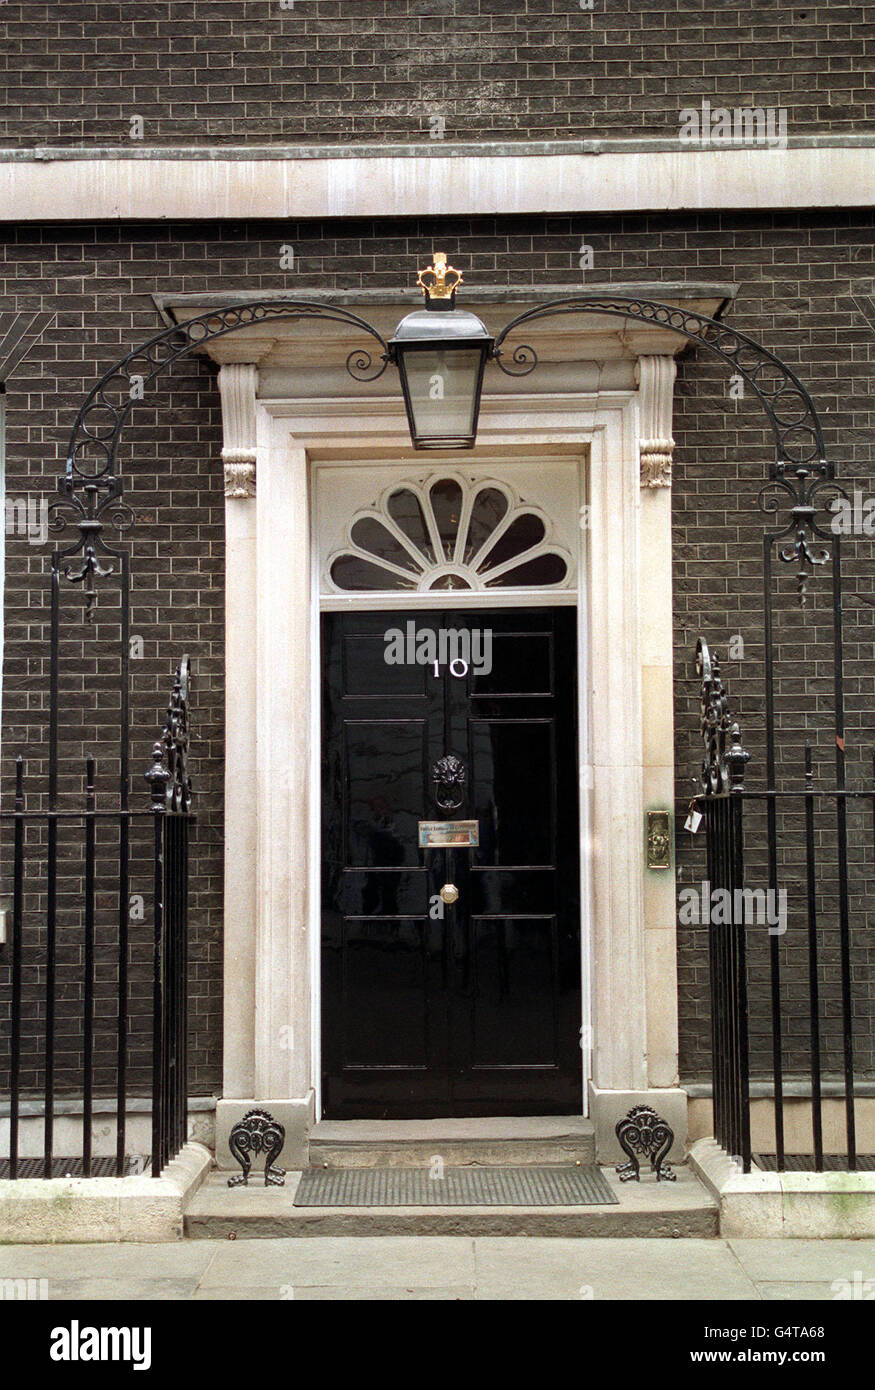 The door of 10 Downing Street, Whitehall, London, offical residence of the British Prime Minister. Stock Photo